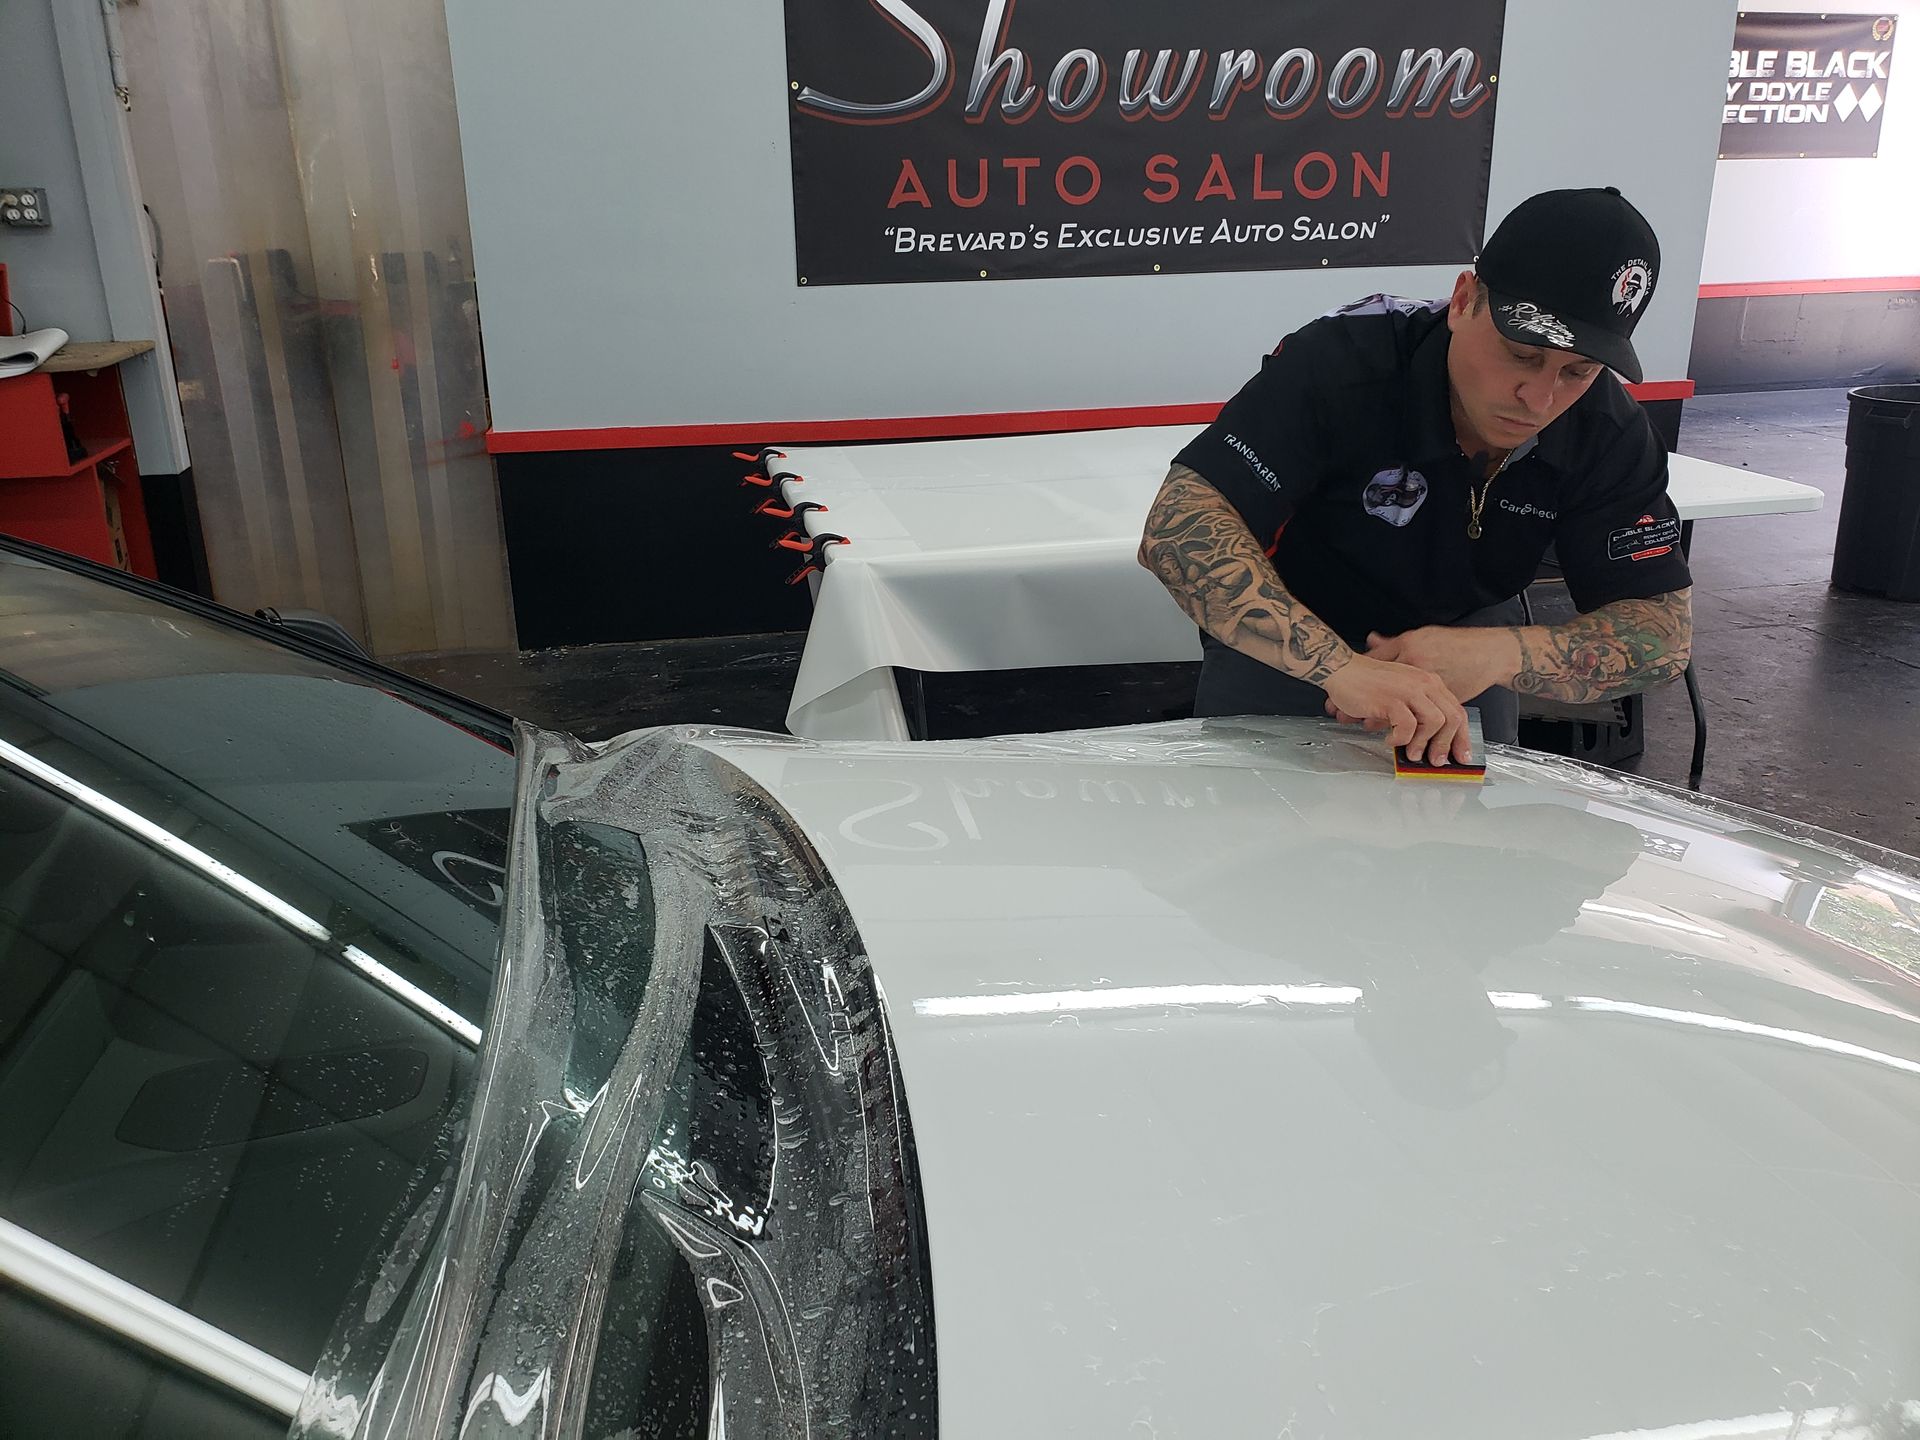 paint protection film service in Melbourne, FL